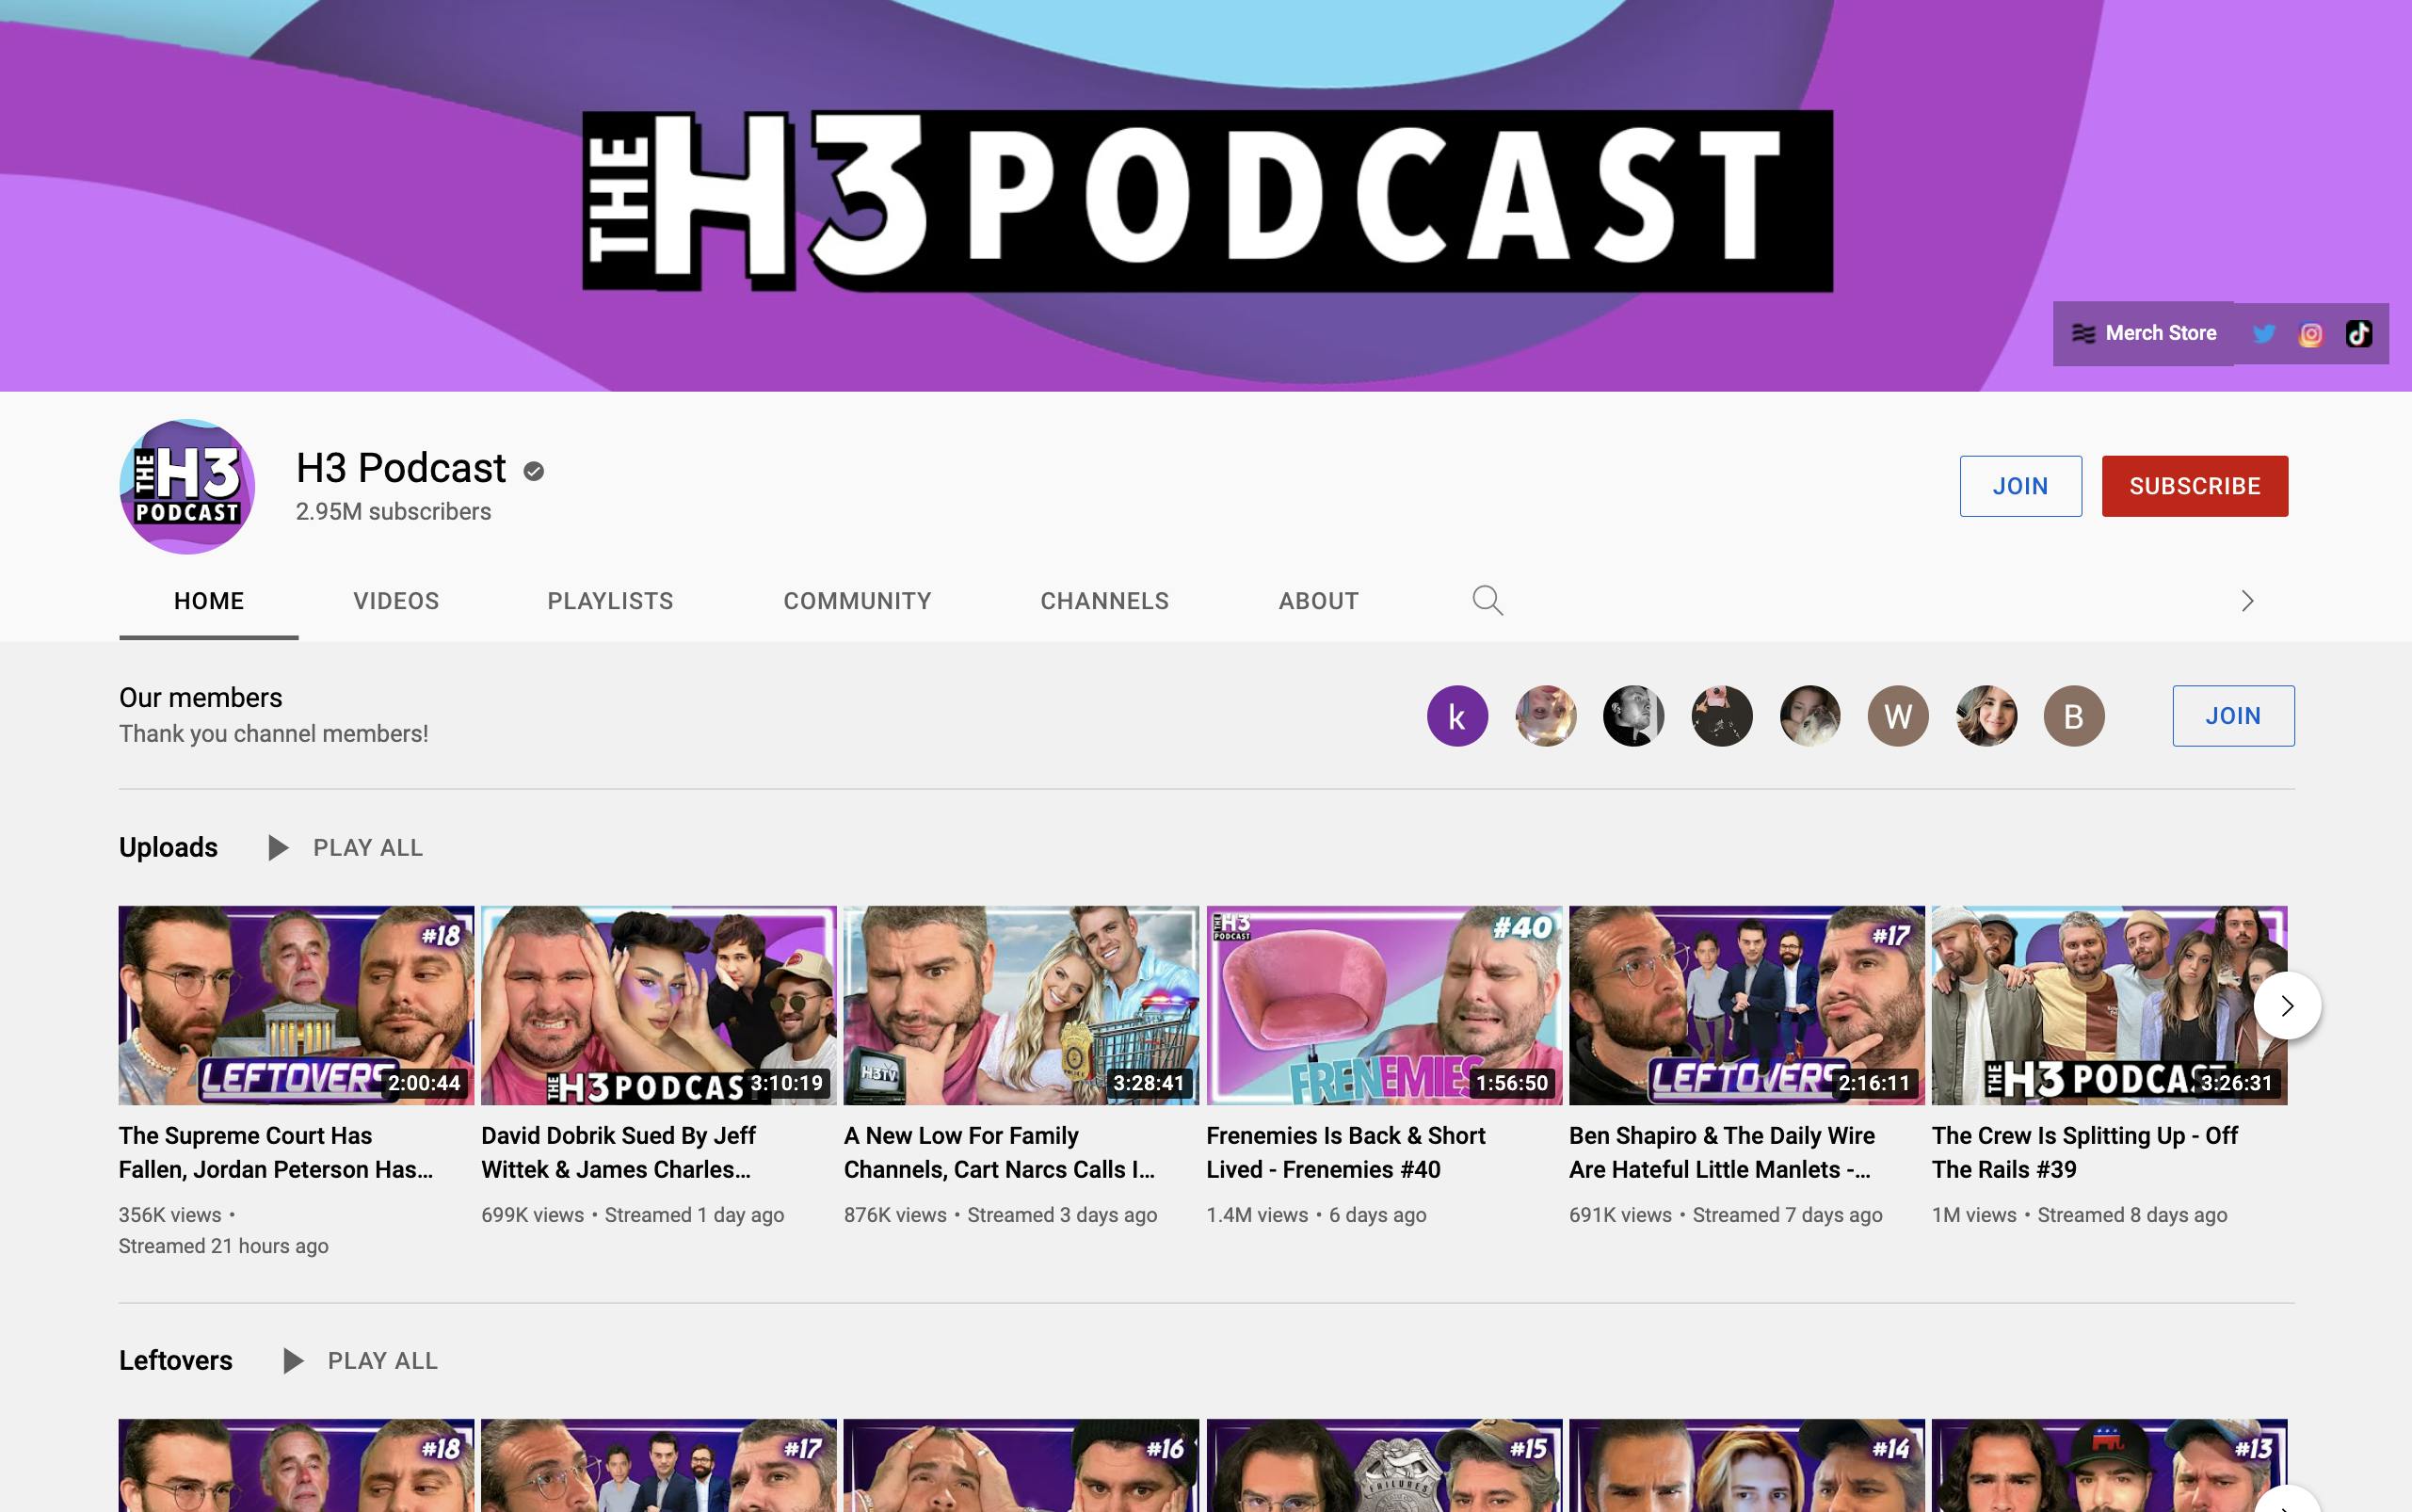 H3H3 Podcast YouTube channel homepage with banner image and video thumbnails